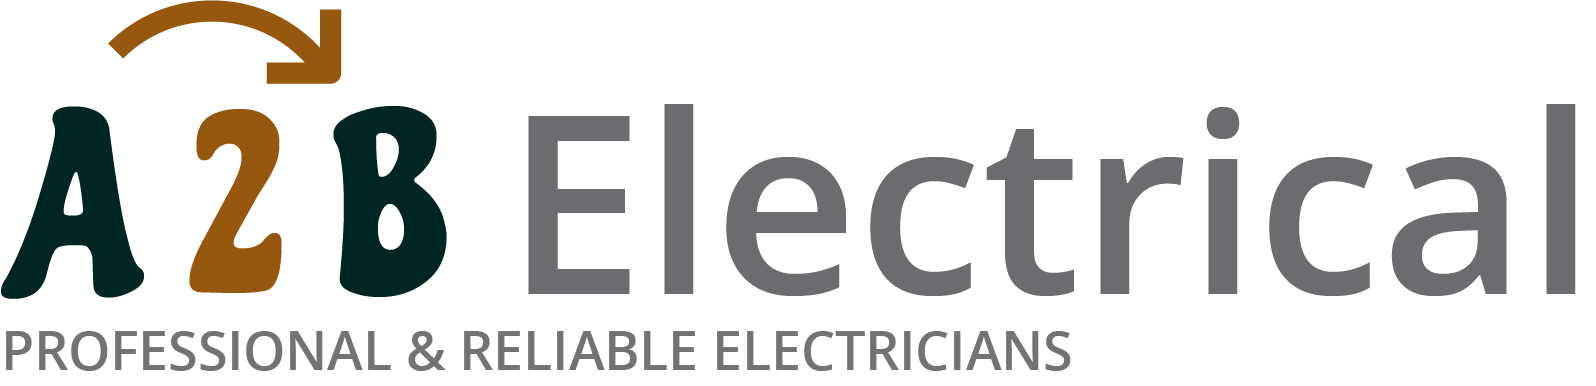 If you have electrical wiring problems in Whitby, we can provide an electrician to have a look for you. 